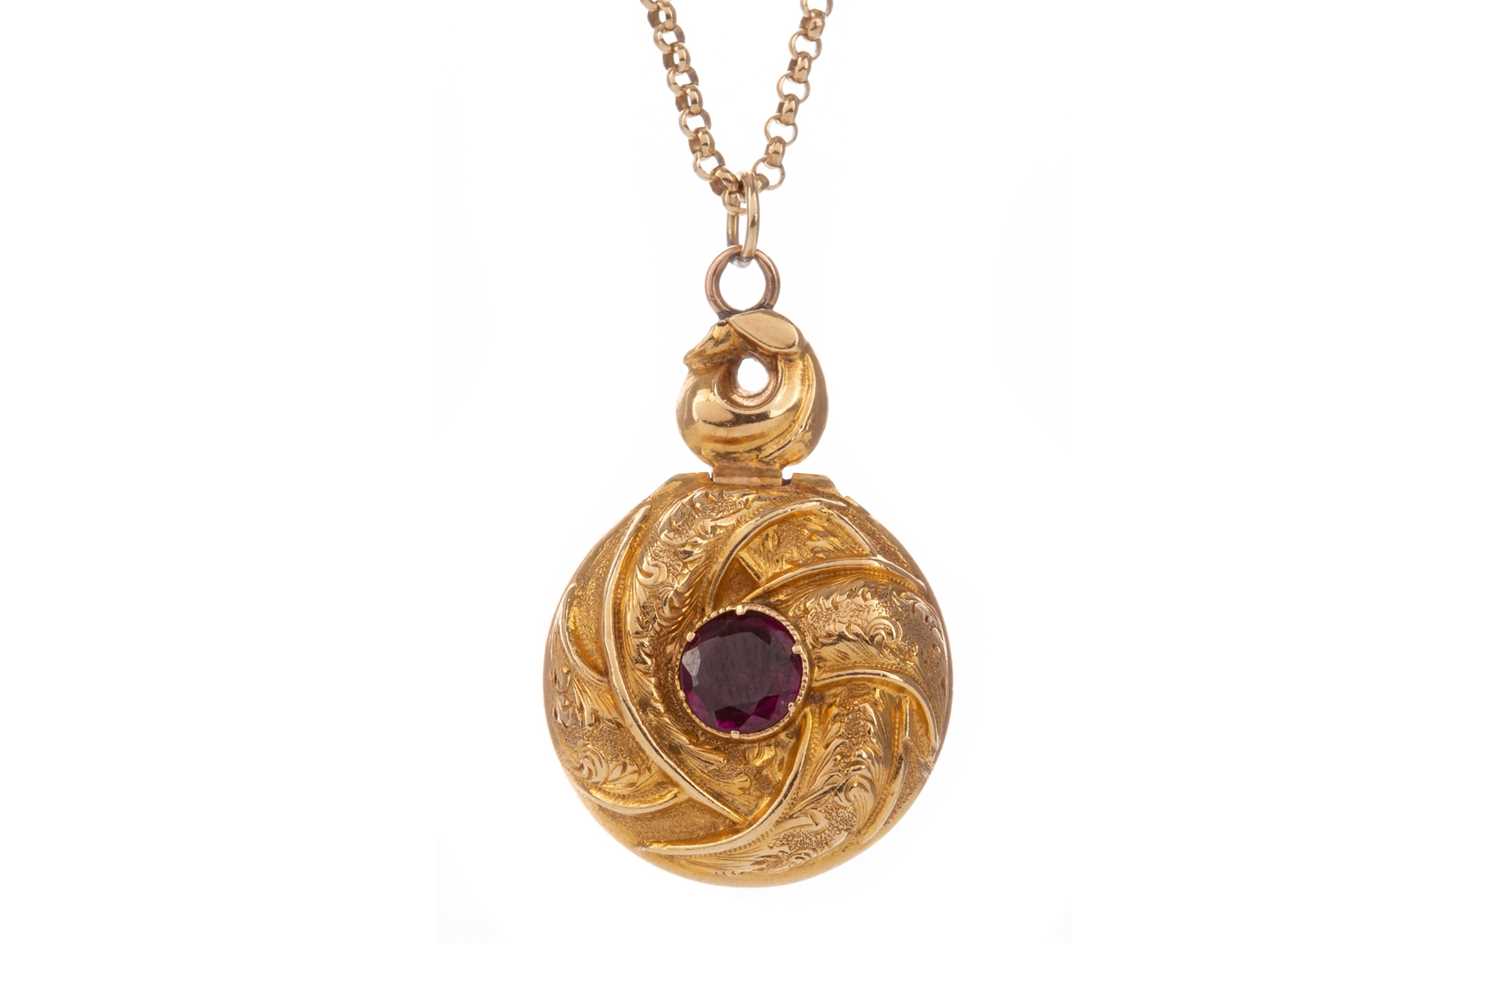 Lot 497 - A VICTORIAN AMETHYST PENDANT ON CHAIN